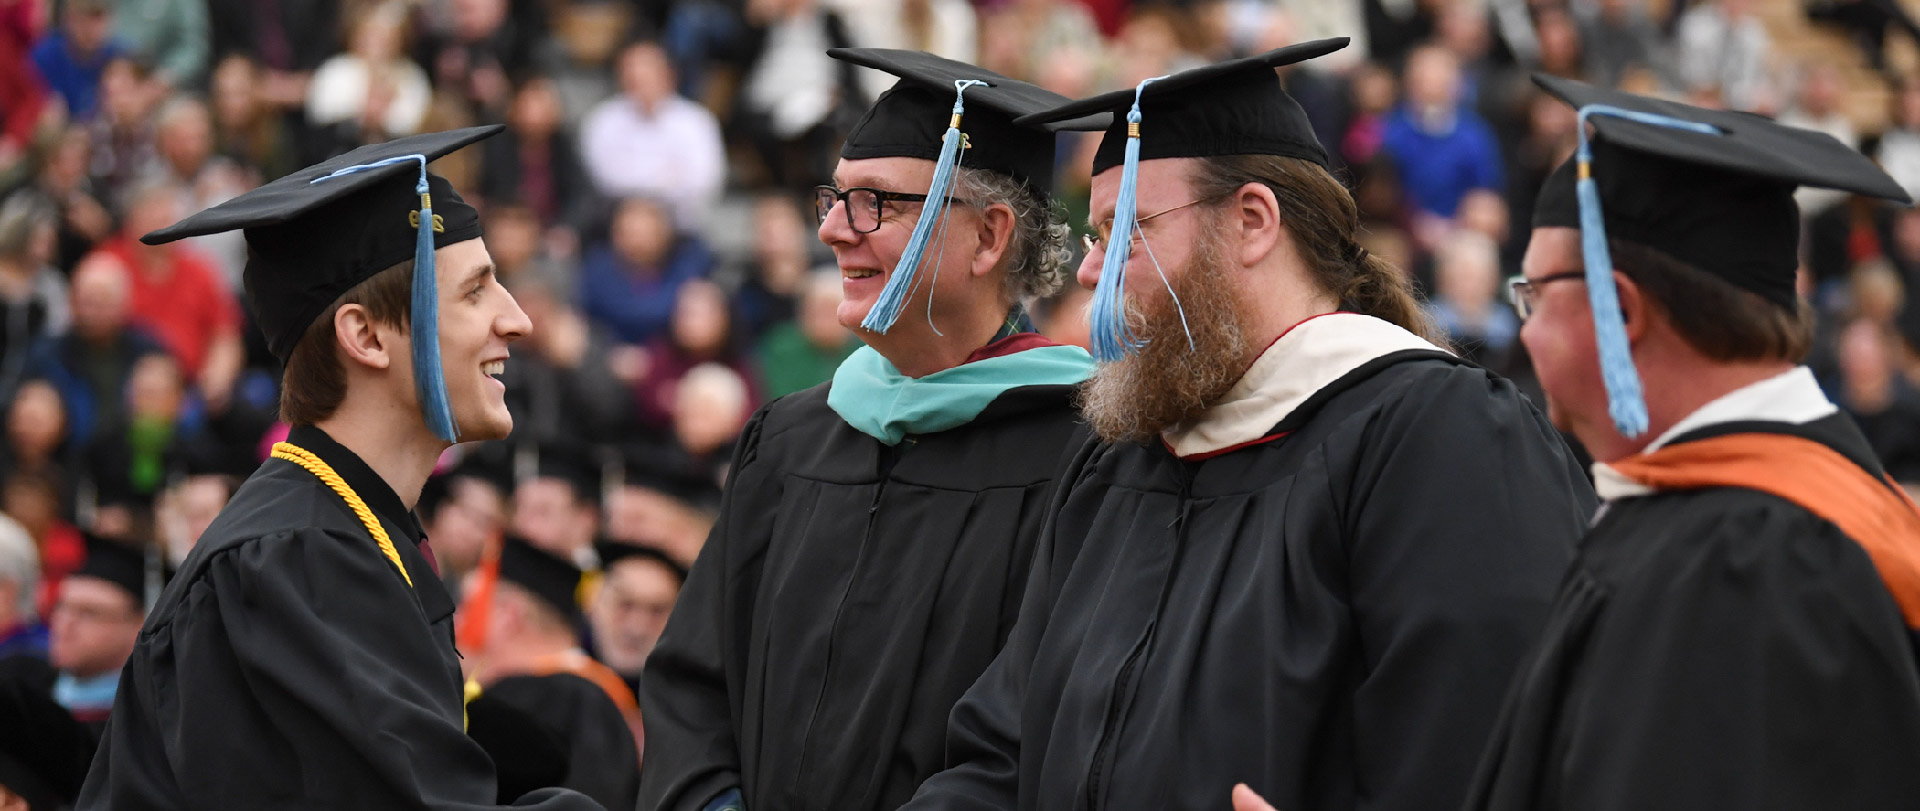 Student and faculty members at a commencement ceremony